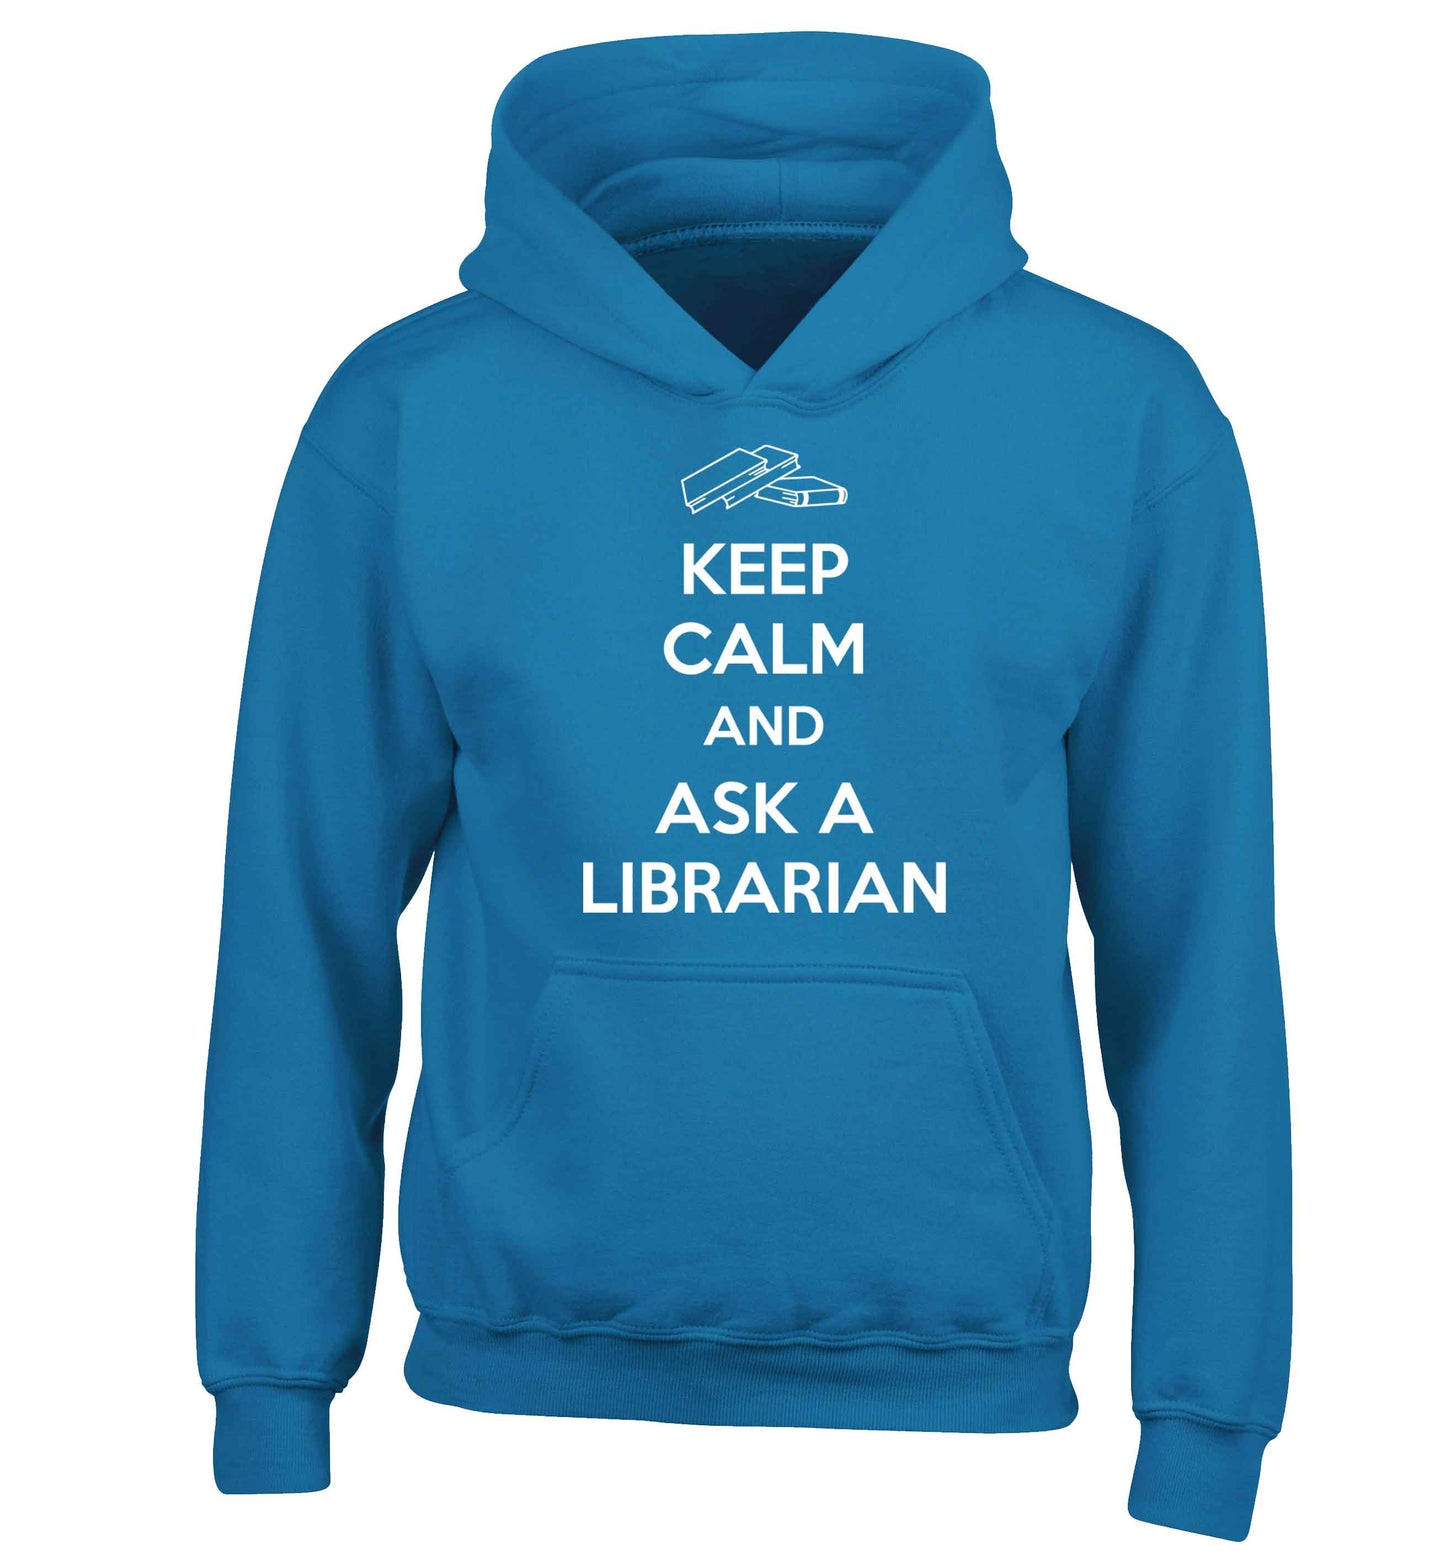 Keep calm and ask a librarian children's blue hoodie 12-13 Years